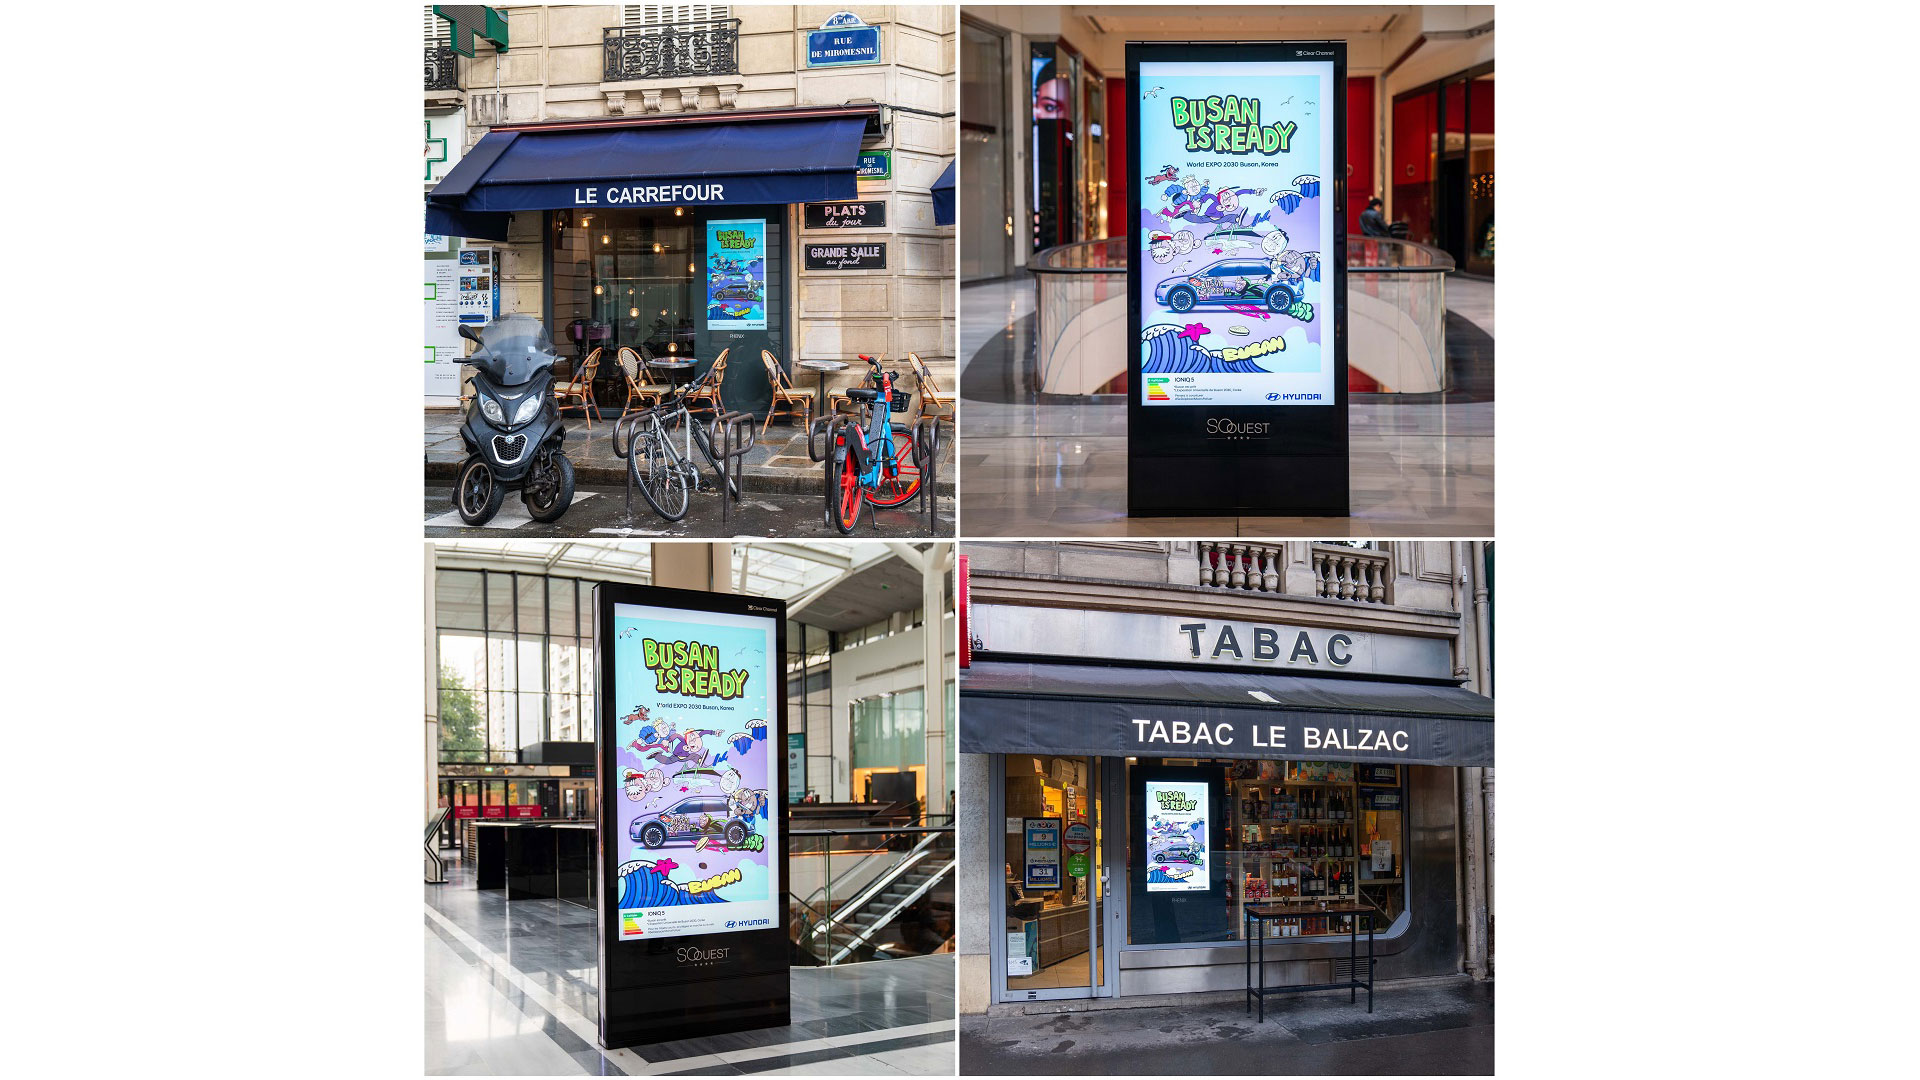 Hyundai Motor Group Draws Attention to Busan's Bid for 2030 World Expo with Large-Scale Outdoor Advertisement in Paris